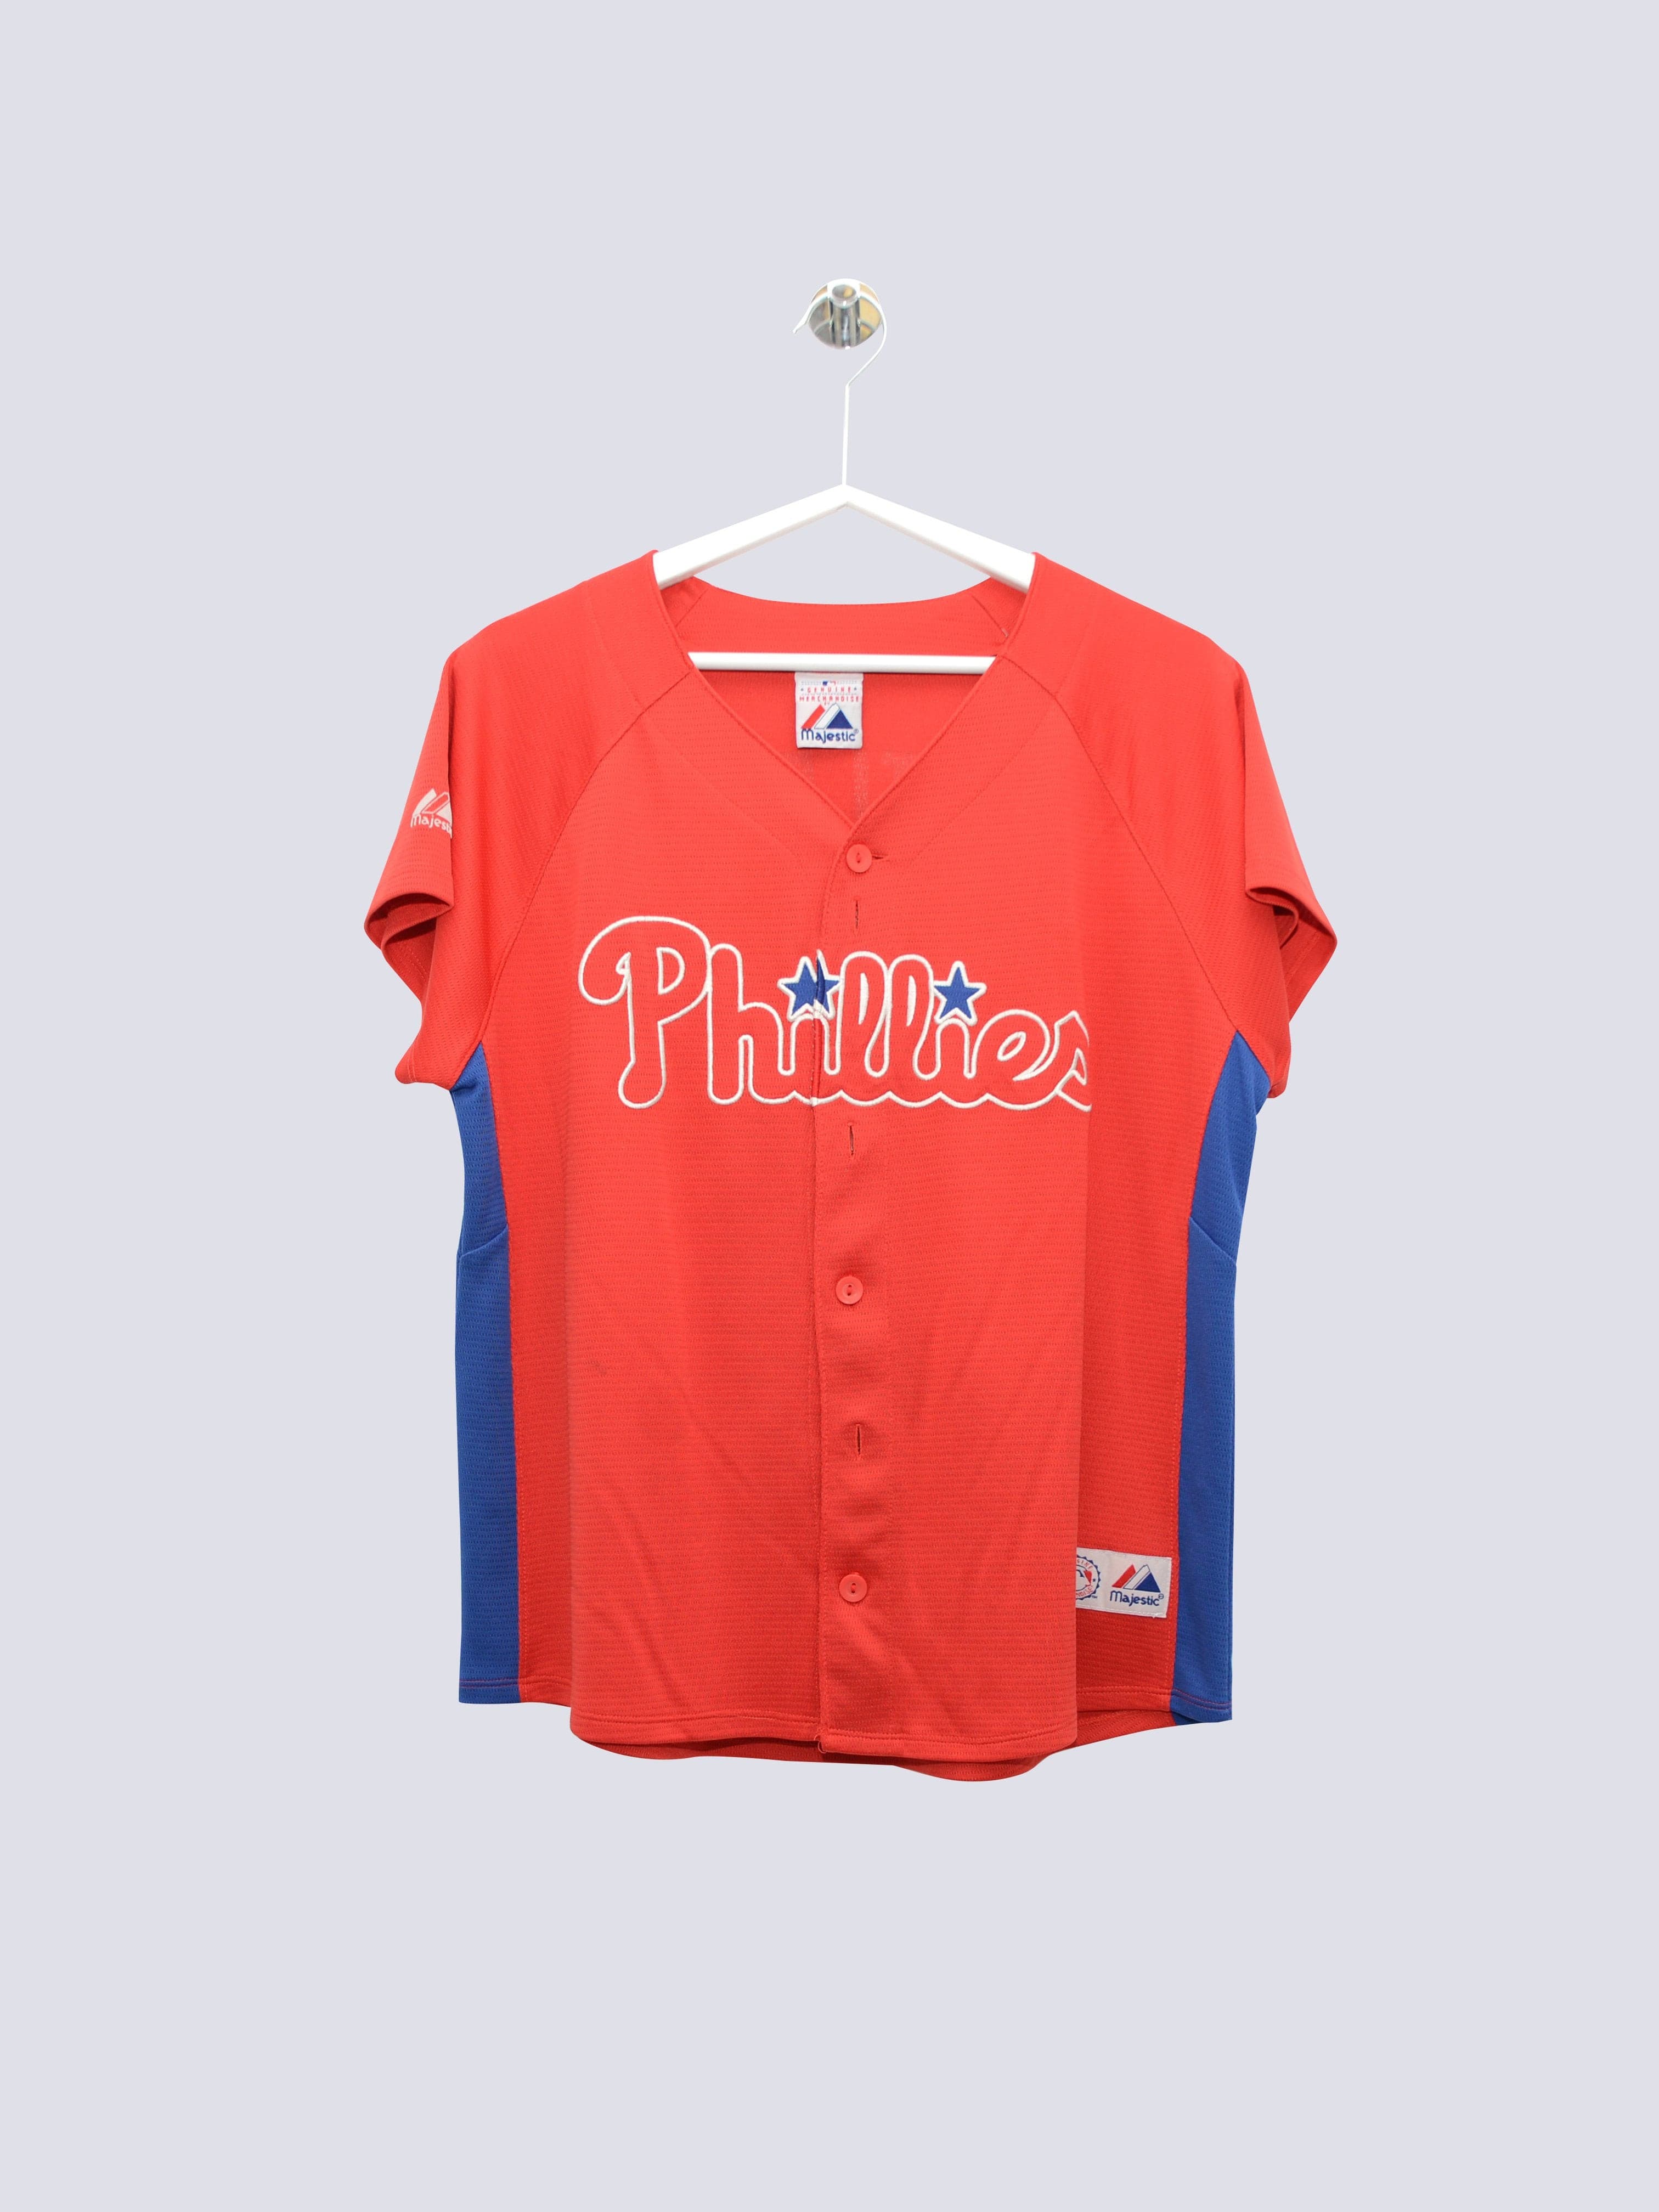 Vintage Majestic MLB Phillies Jersey Red // X-Small - RHAGHOUSE VINTAGE